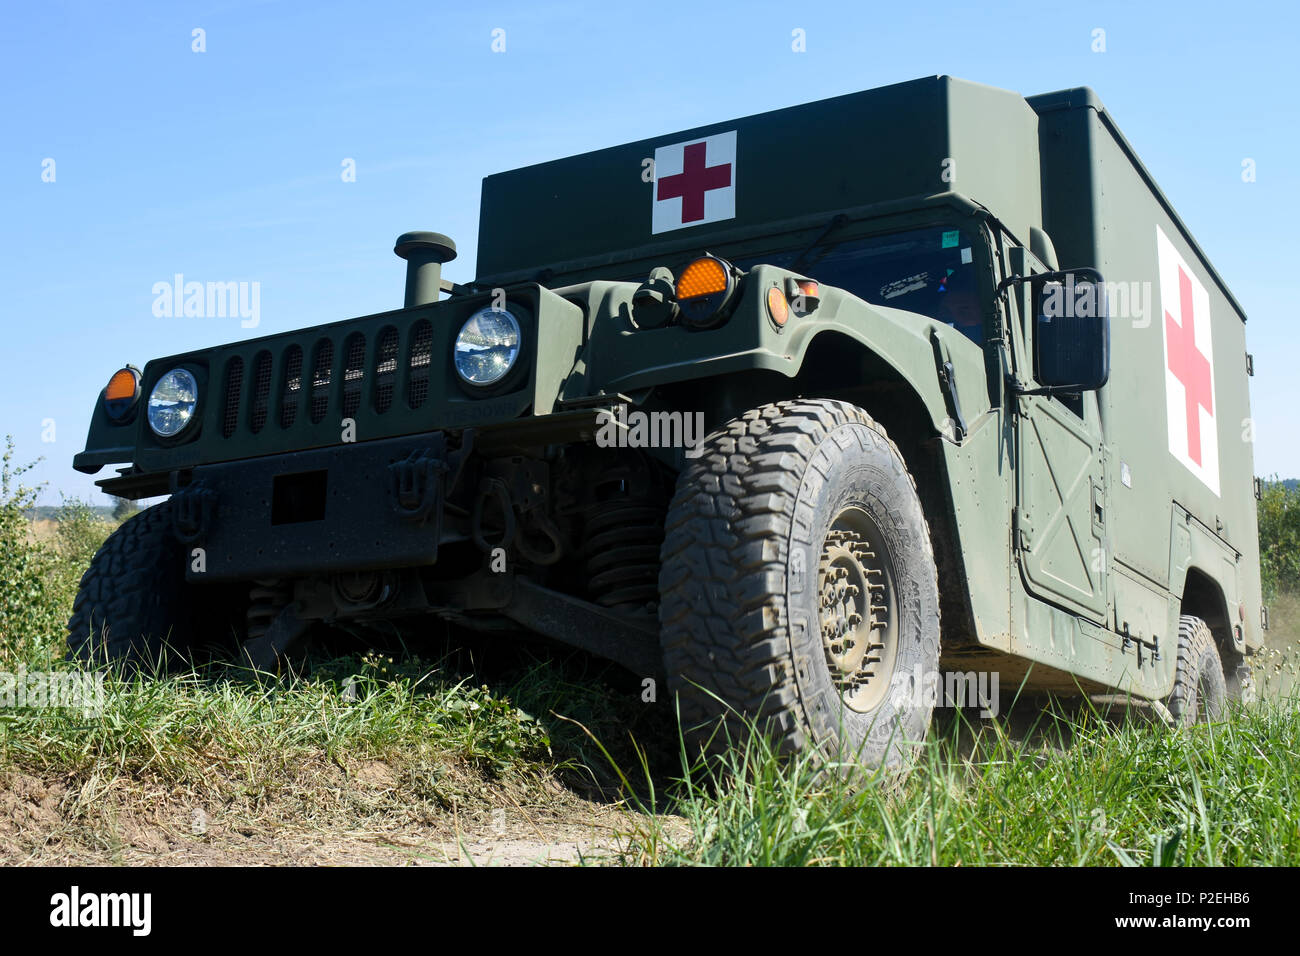 5 Field Ambulance High Resolution Stock Photography and Images Alamy